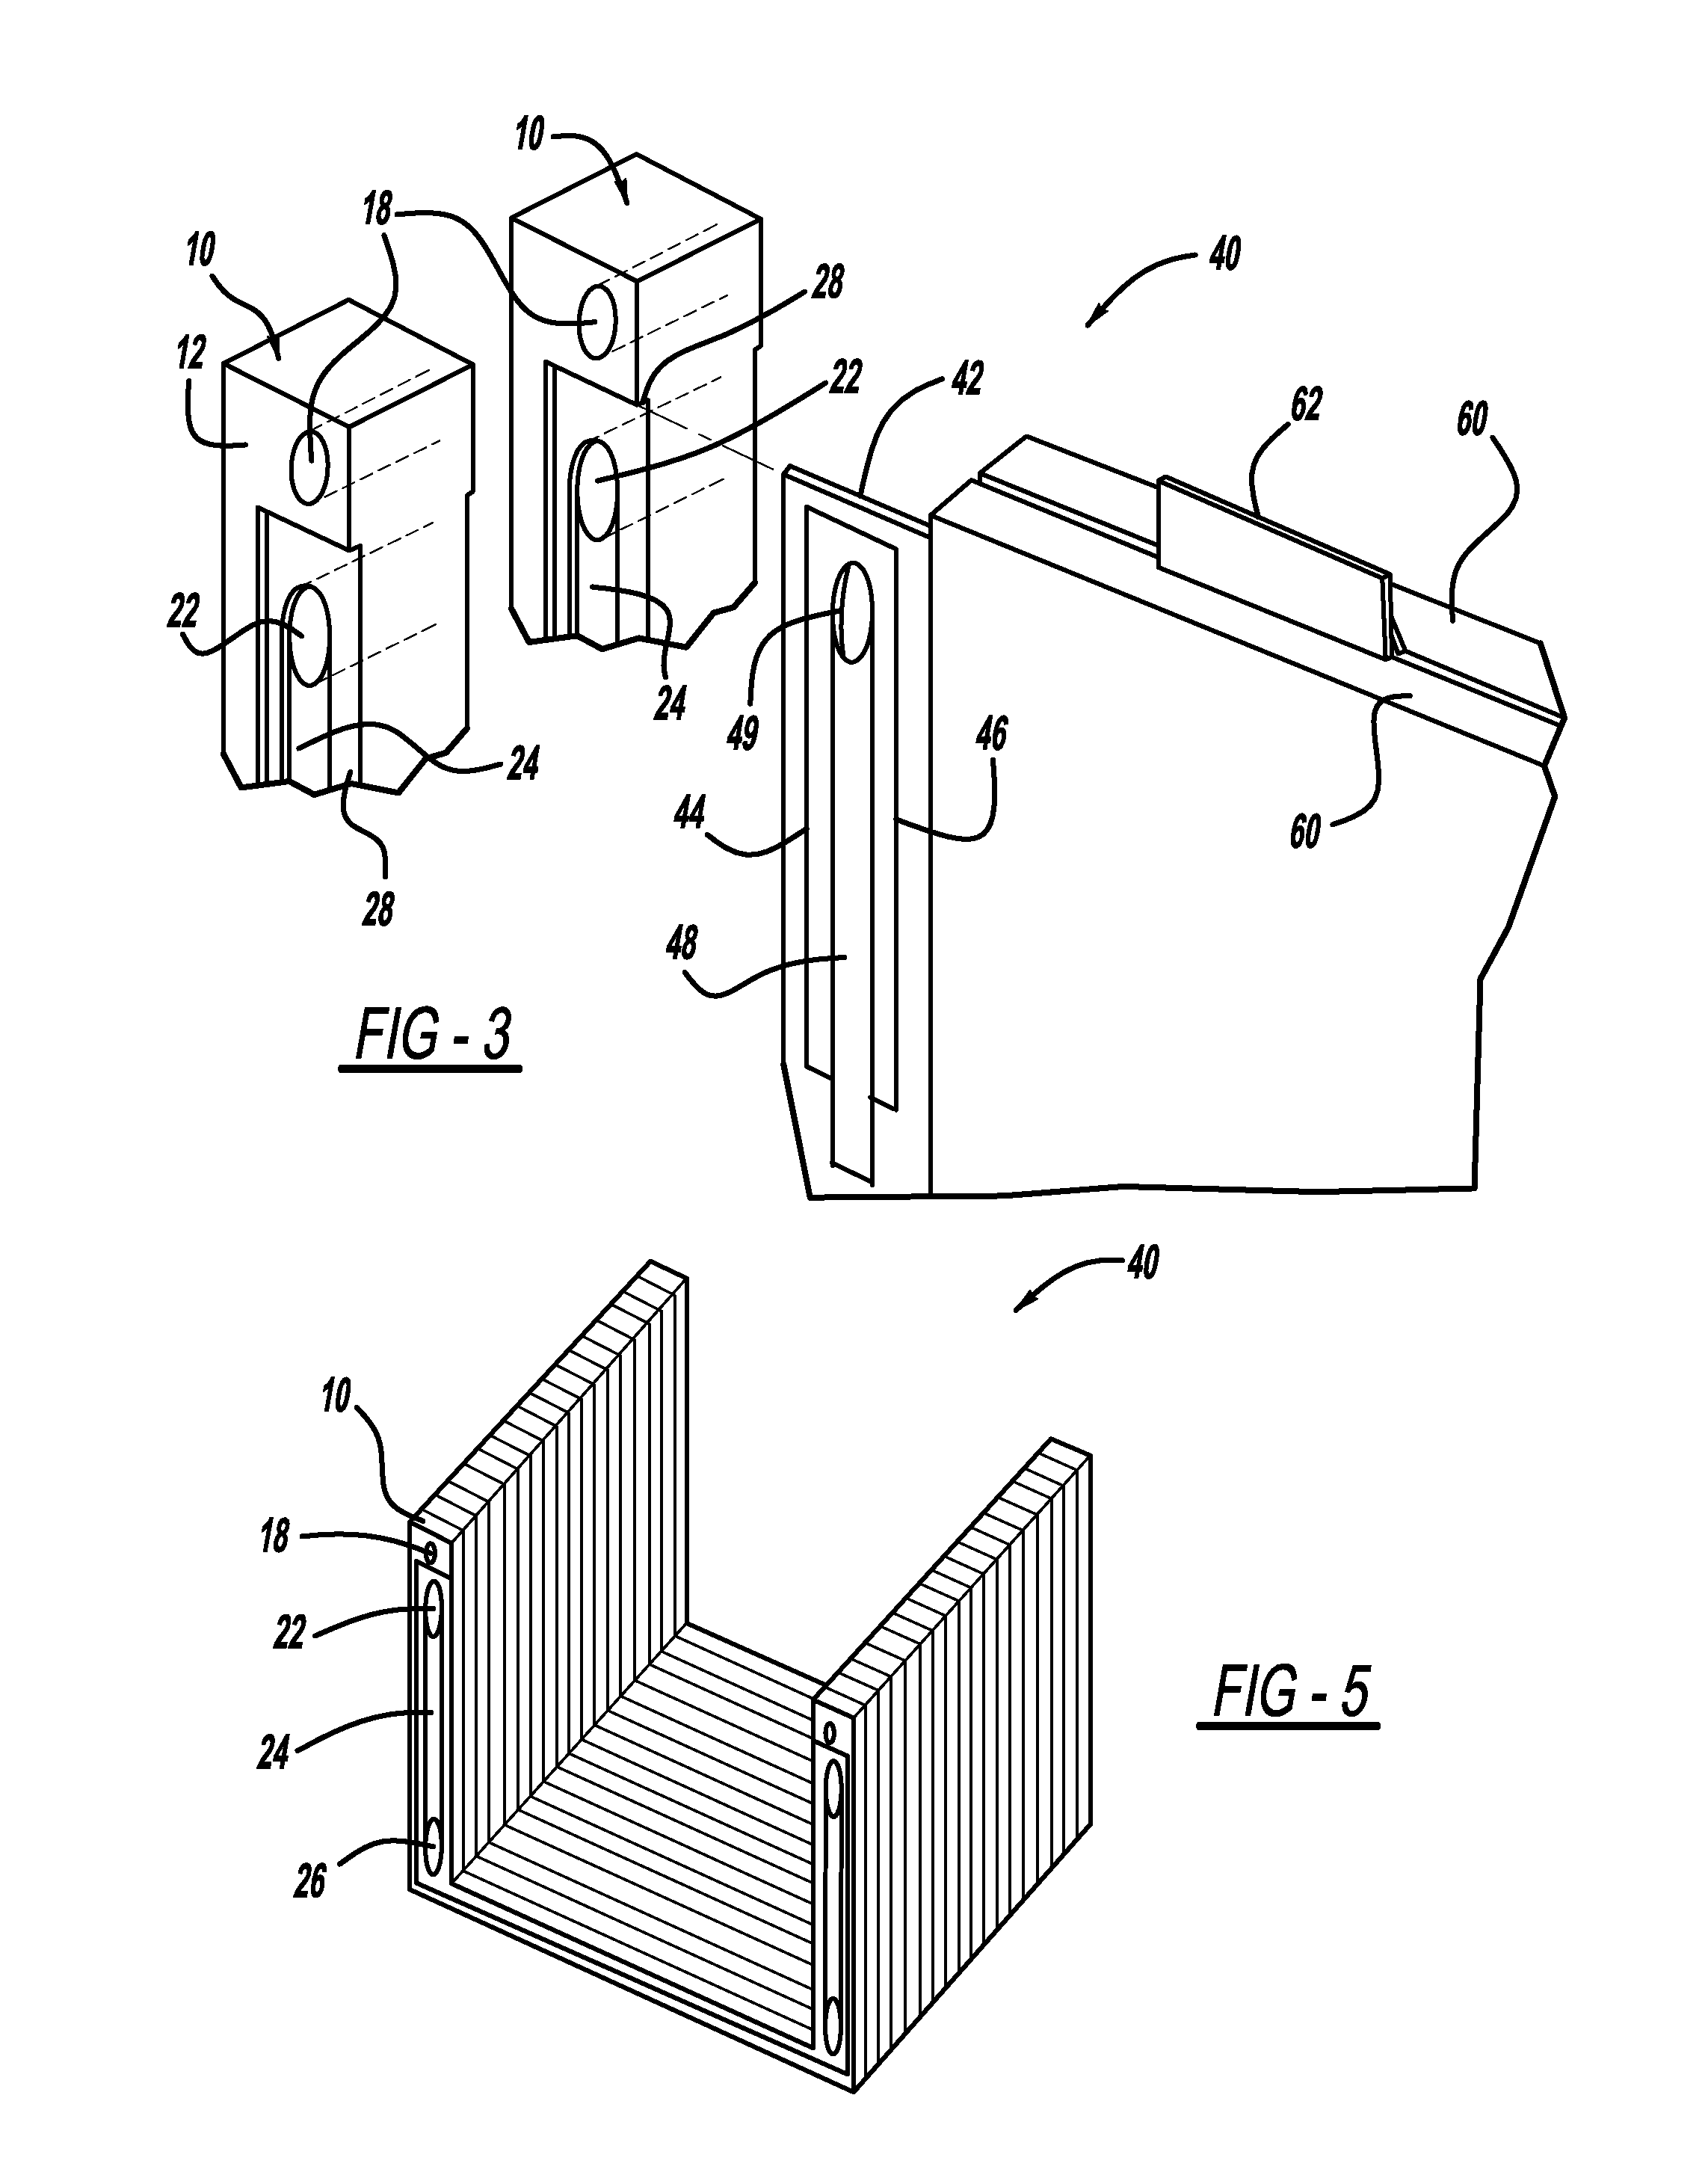 Modular plate carrier concept for mounting and embedded cooling of pouch cell battery assemblies